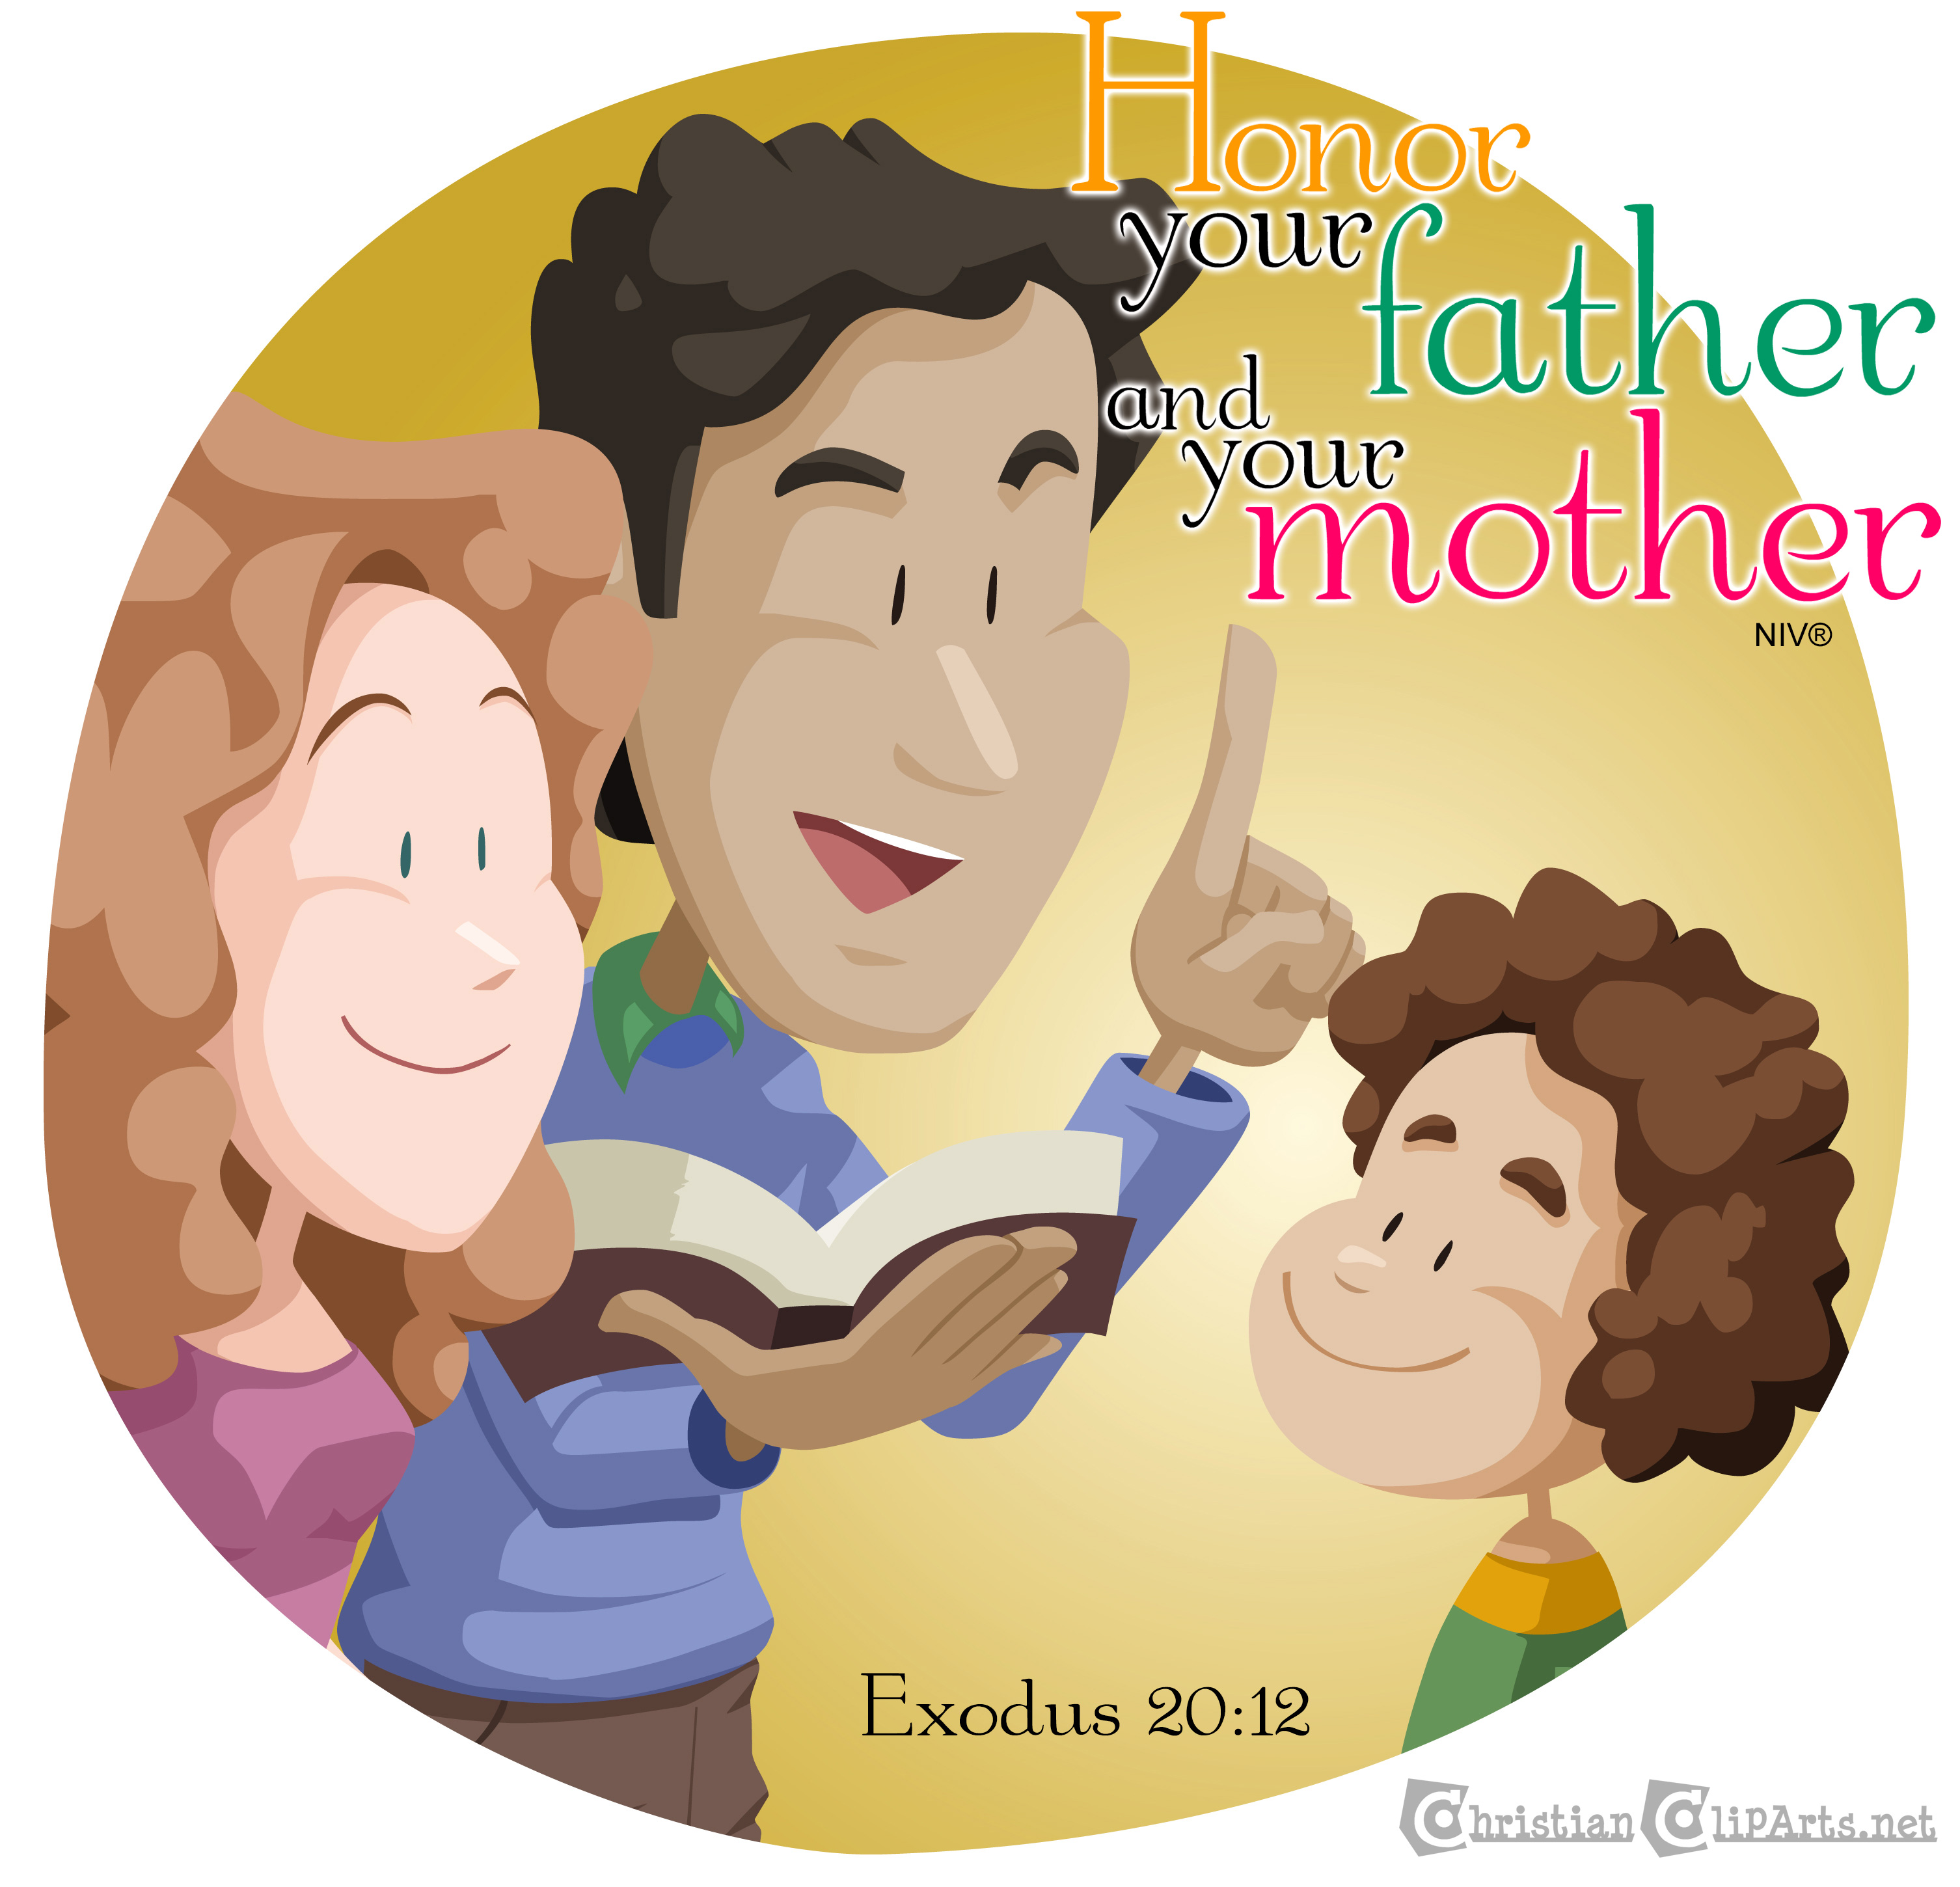 https://sundayschool.works/wp-content/uploads/2020/05/honor-your-father-and-mother.jpg